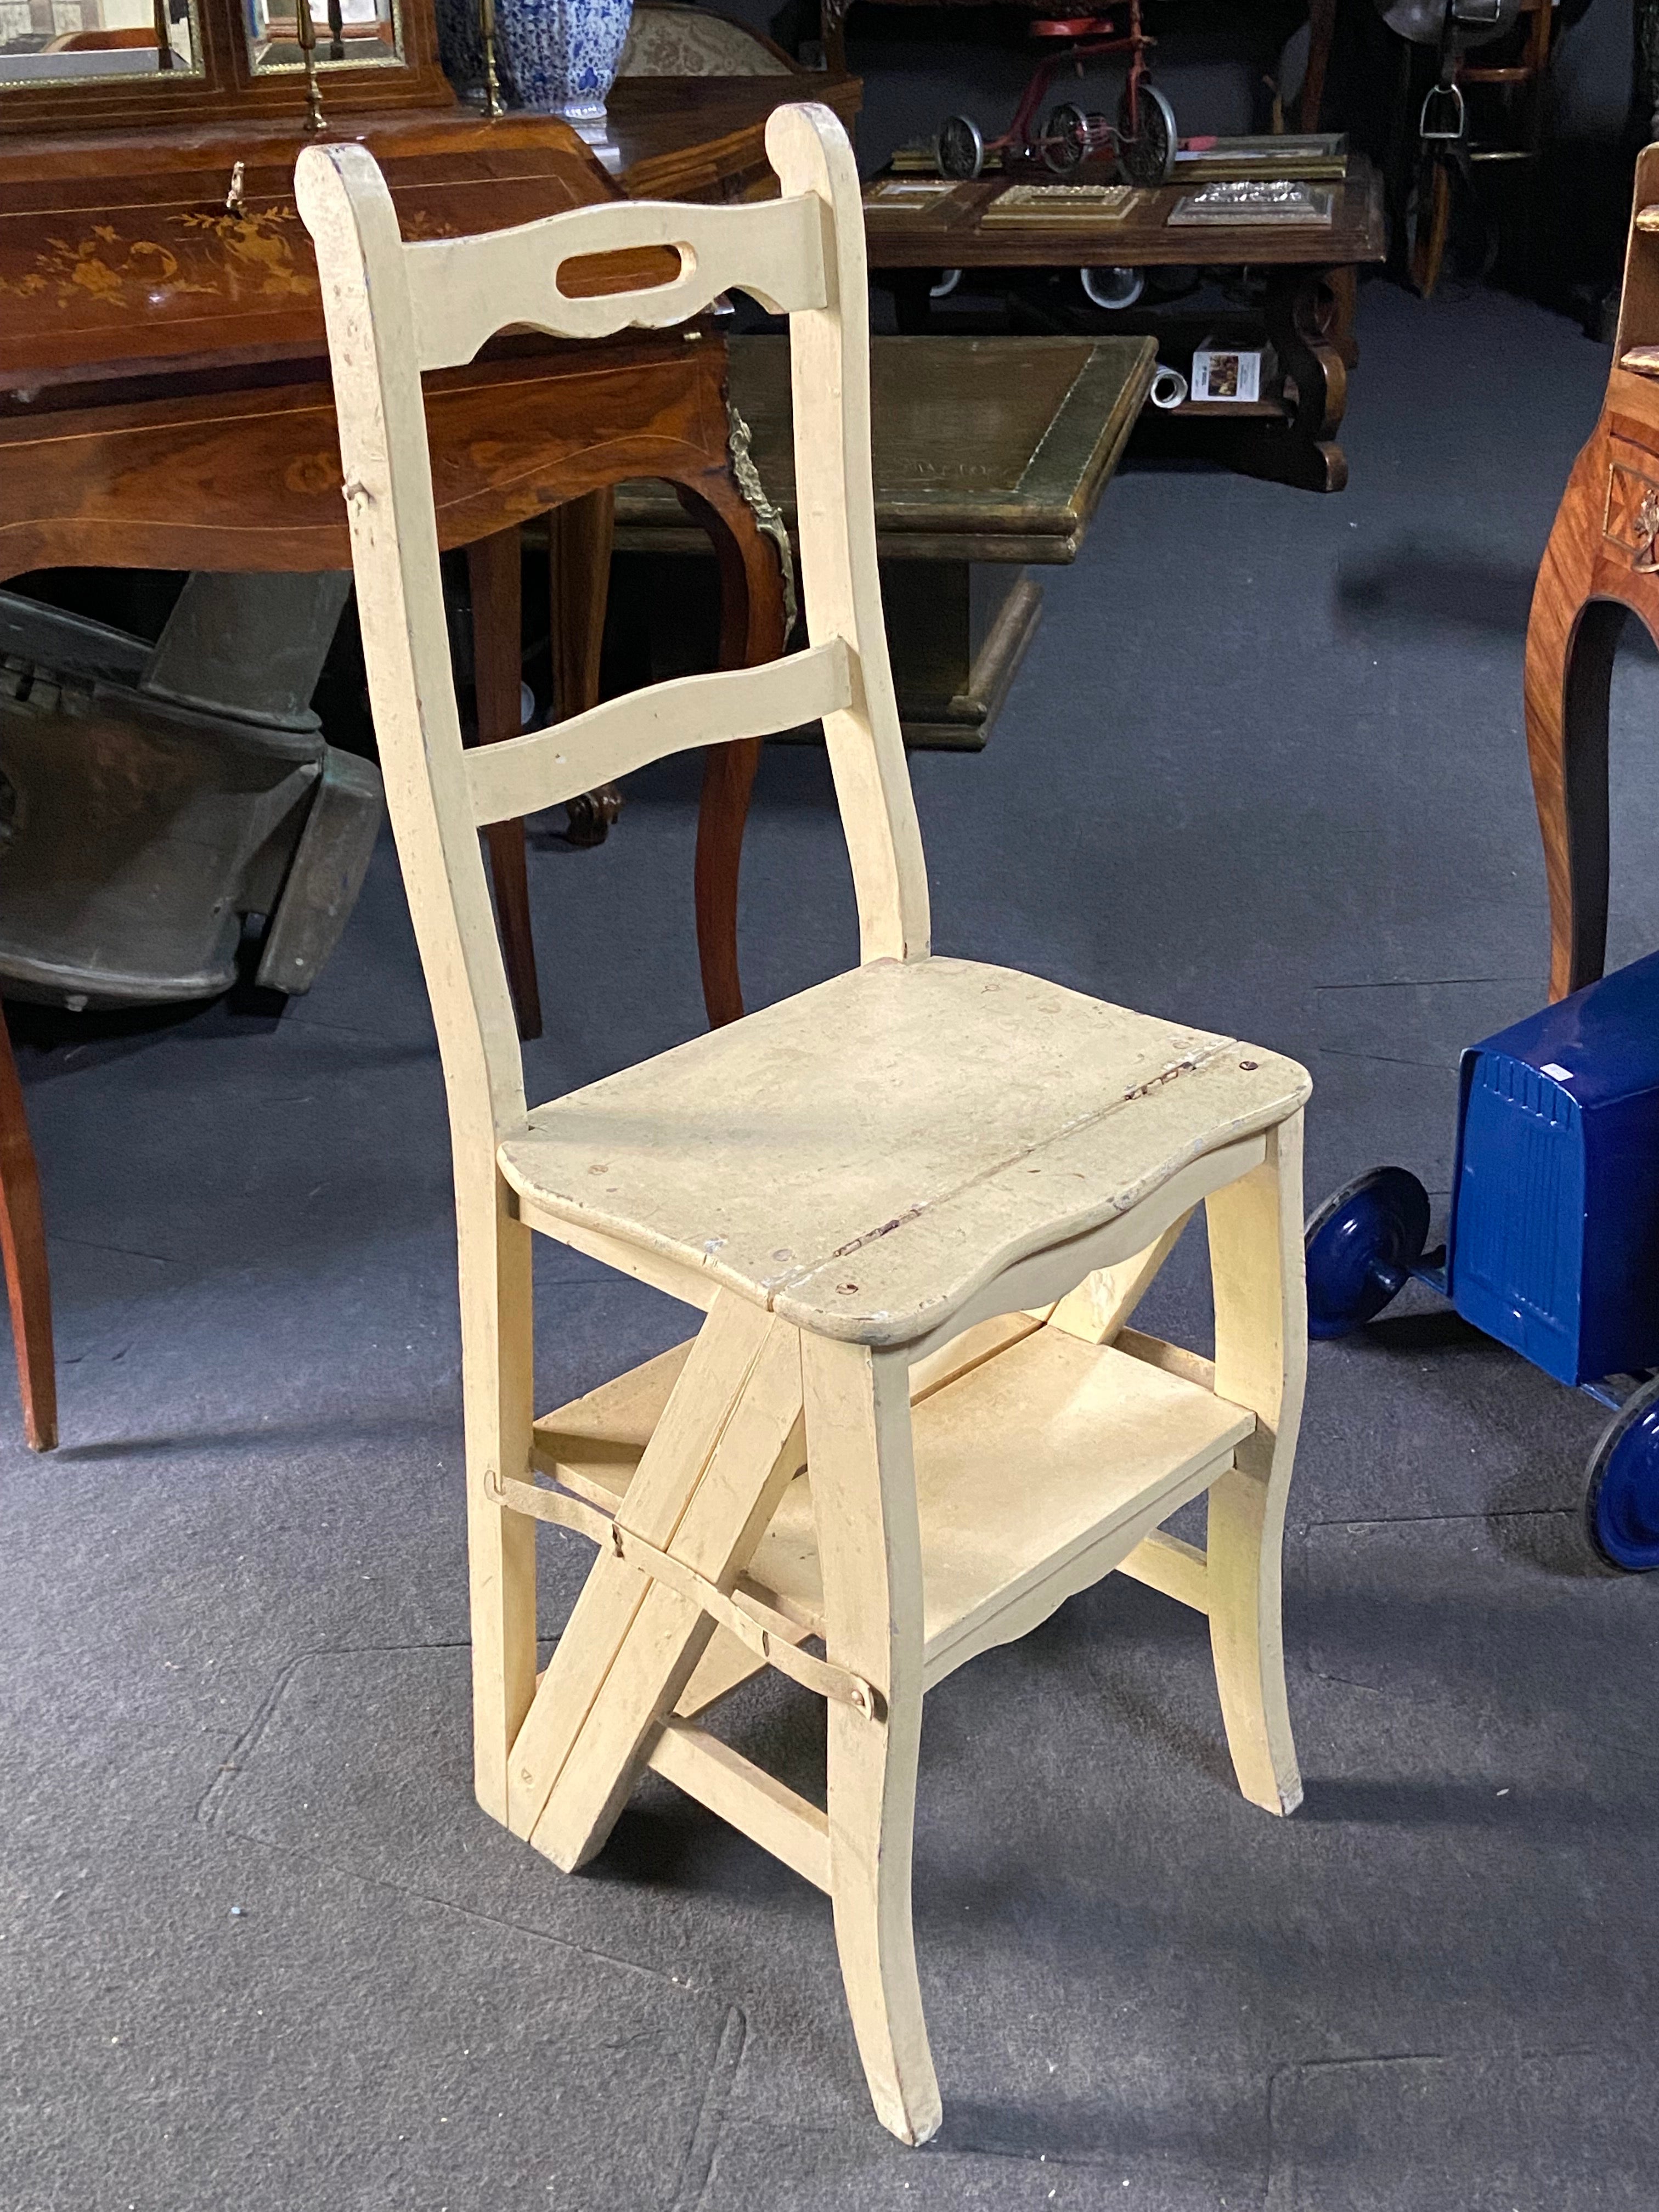 Made in the beginning of 20th century in France this antique ladder chair hand painted in beige is functional as seating or as a library and kitchen ladder. The chair easily converts into a ladder with four stairs and it has and Iron strap with hook